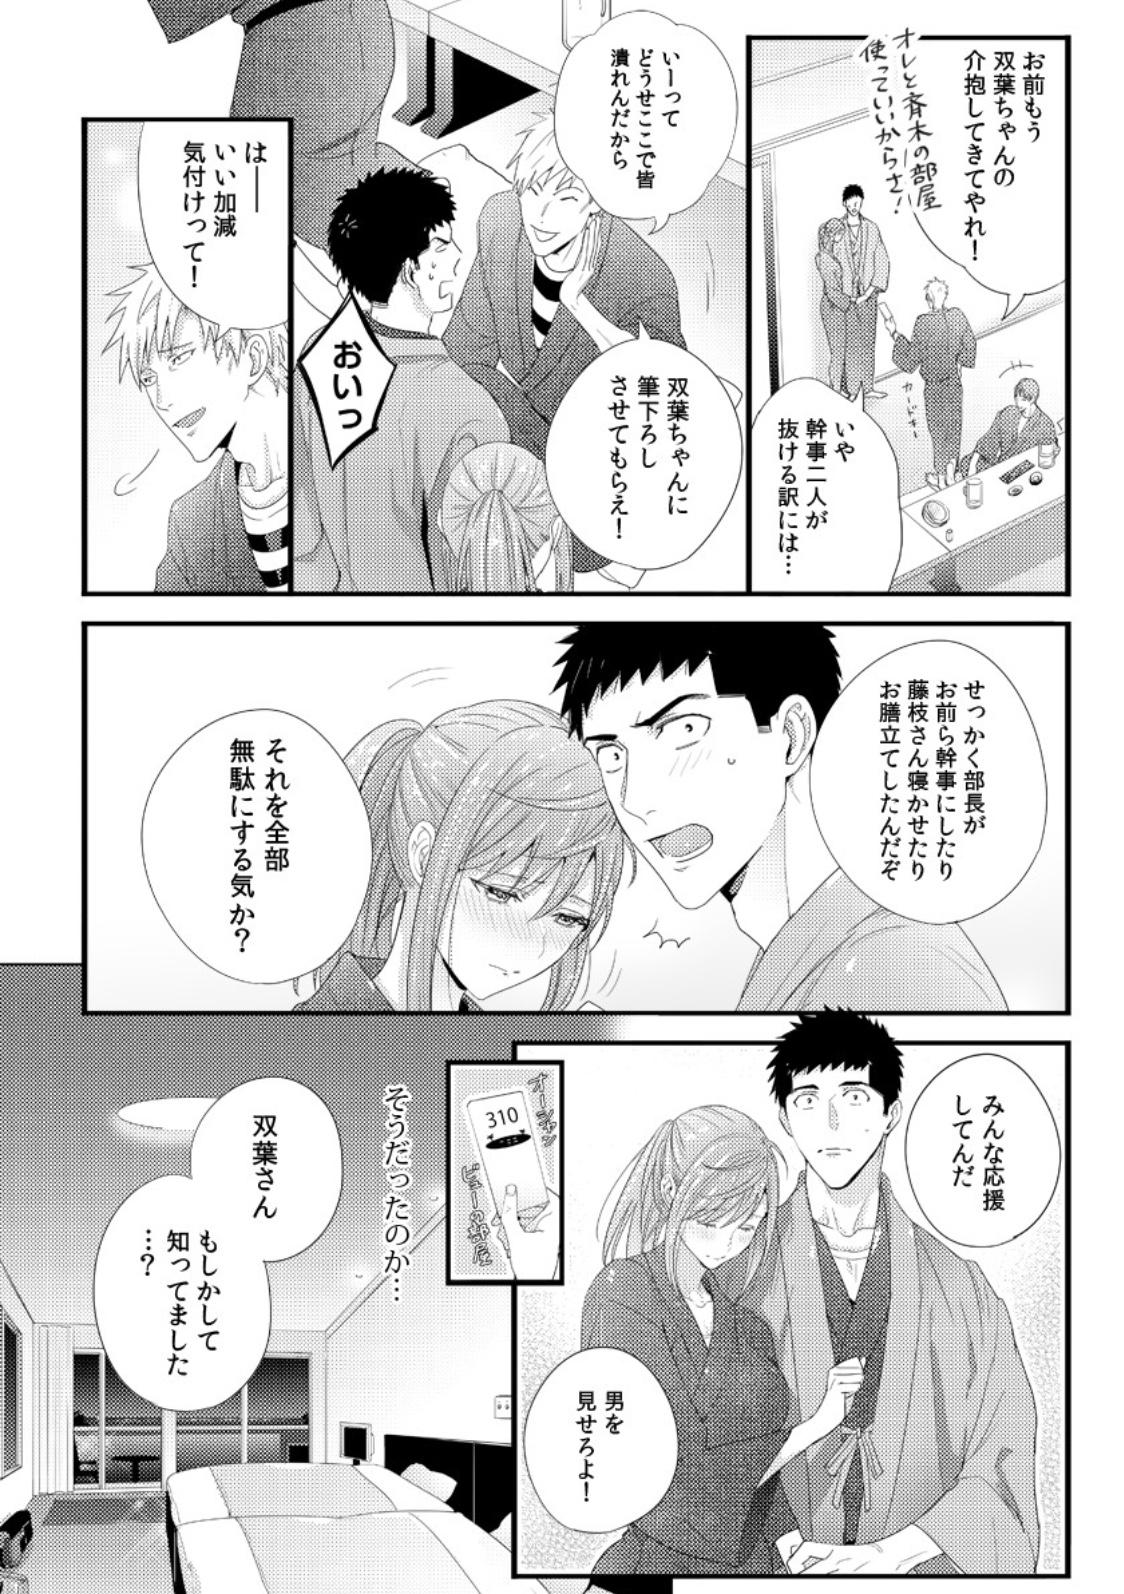 Please Let Me Hold You Futaba-San! Ch. 1+2 11